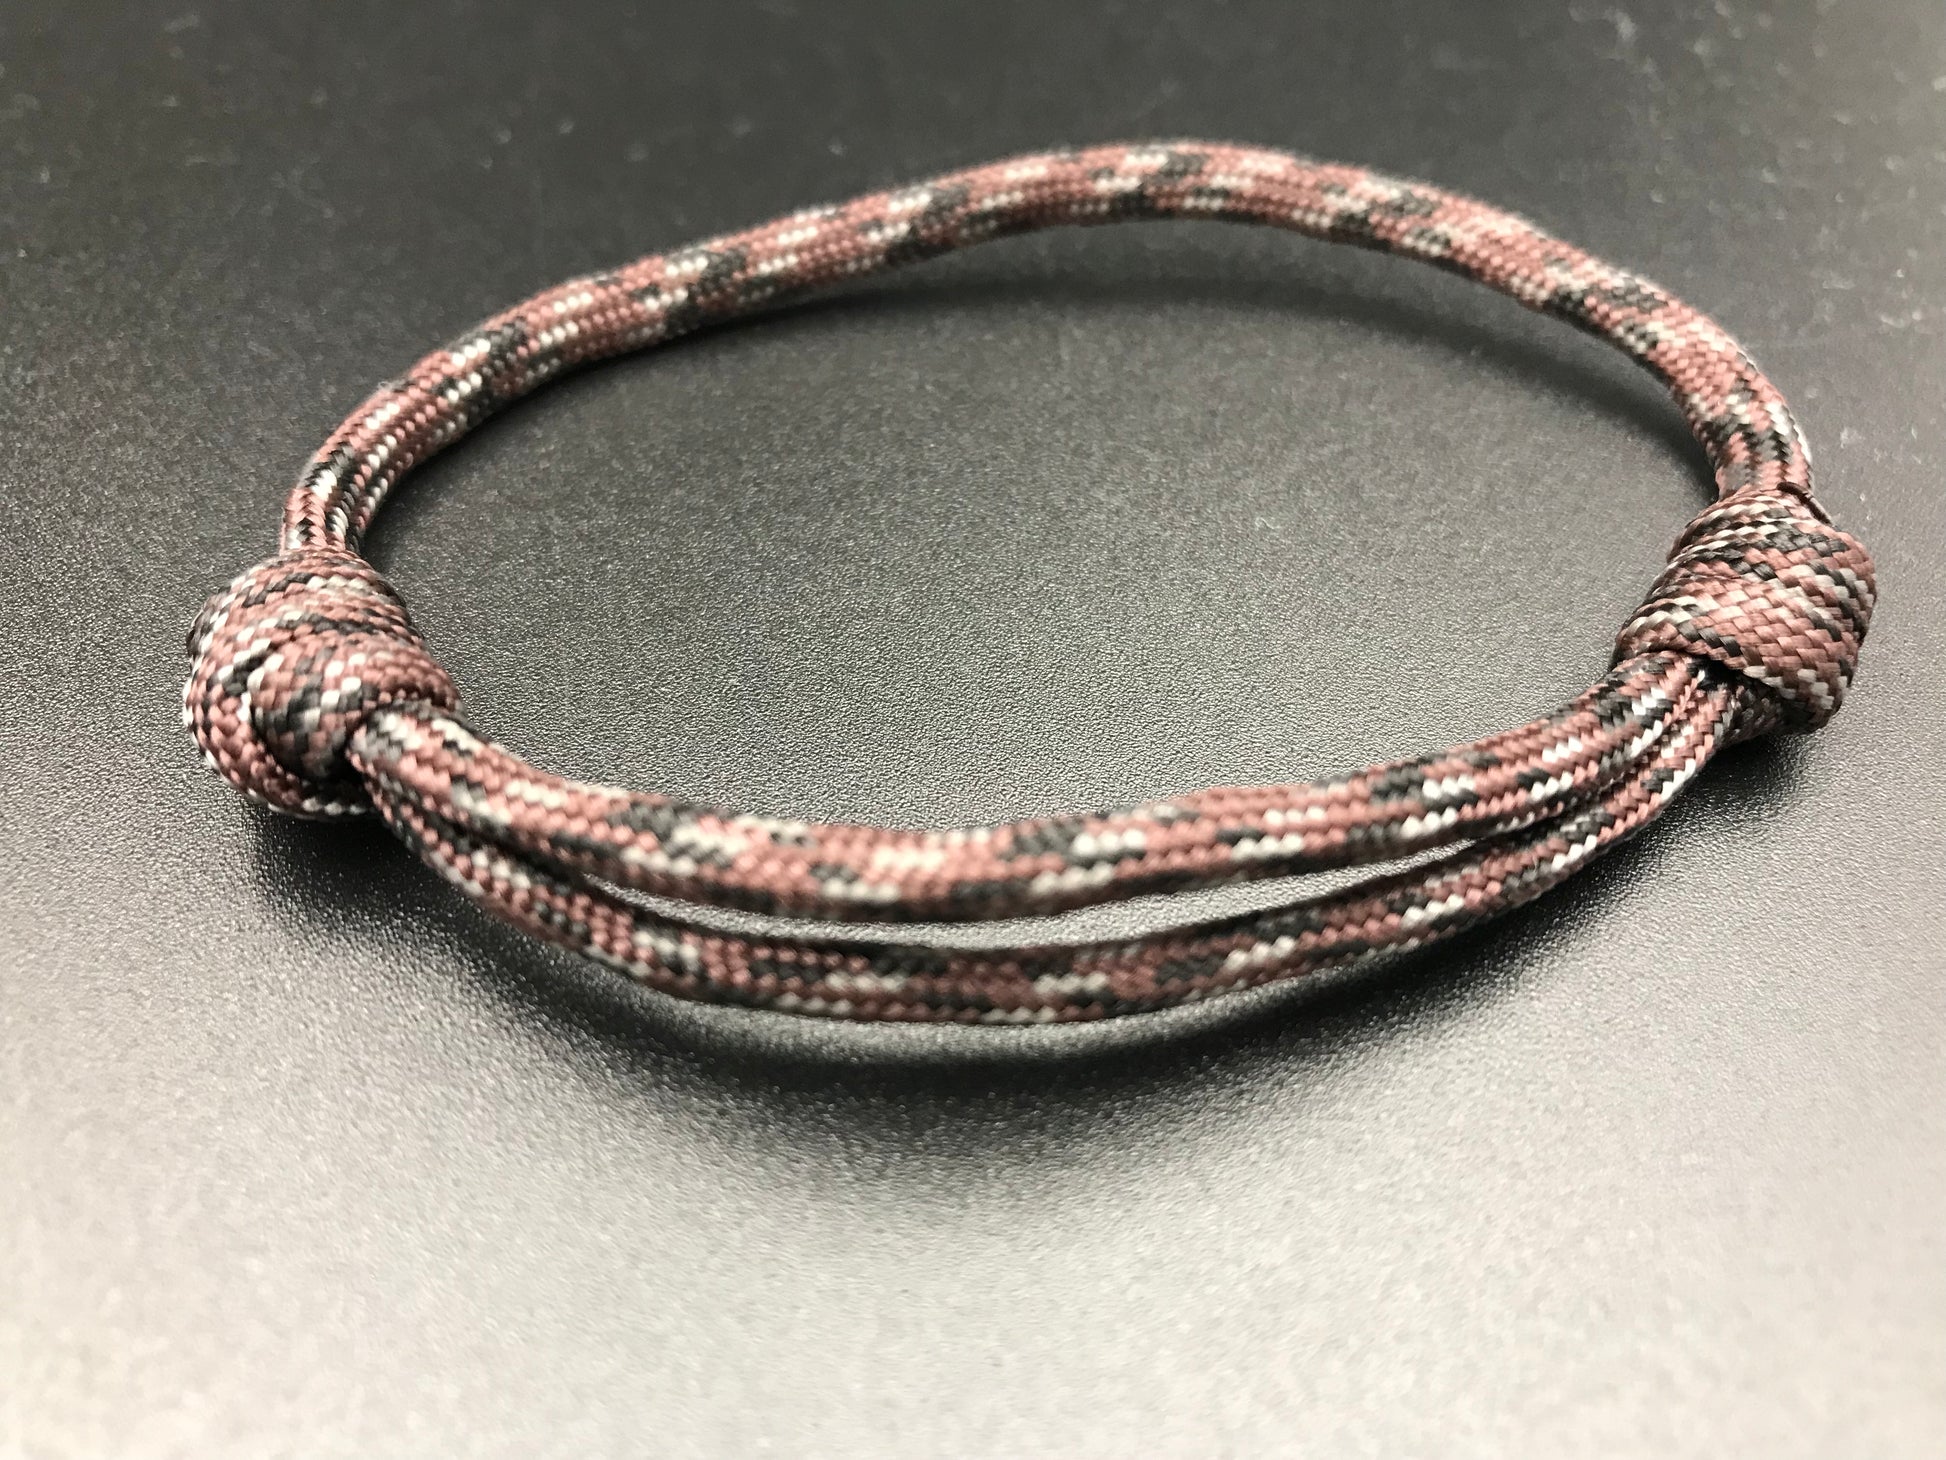 Paracord friendship bracelet In burnt hickory brown ( woody browns black and white) light weight and adjustable